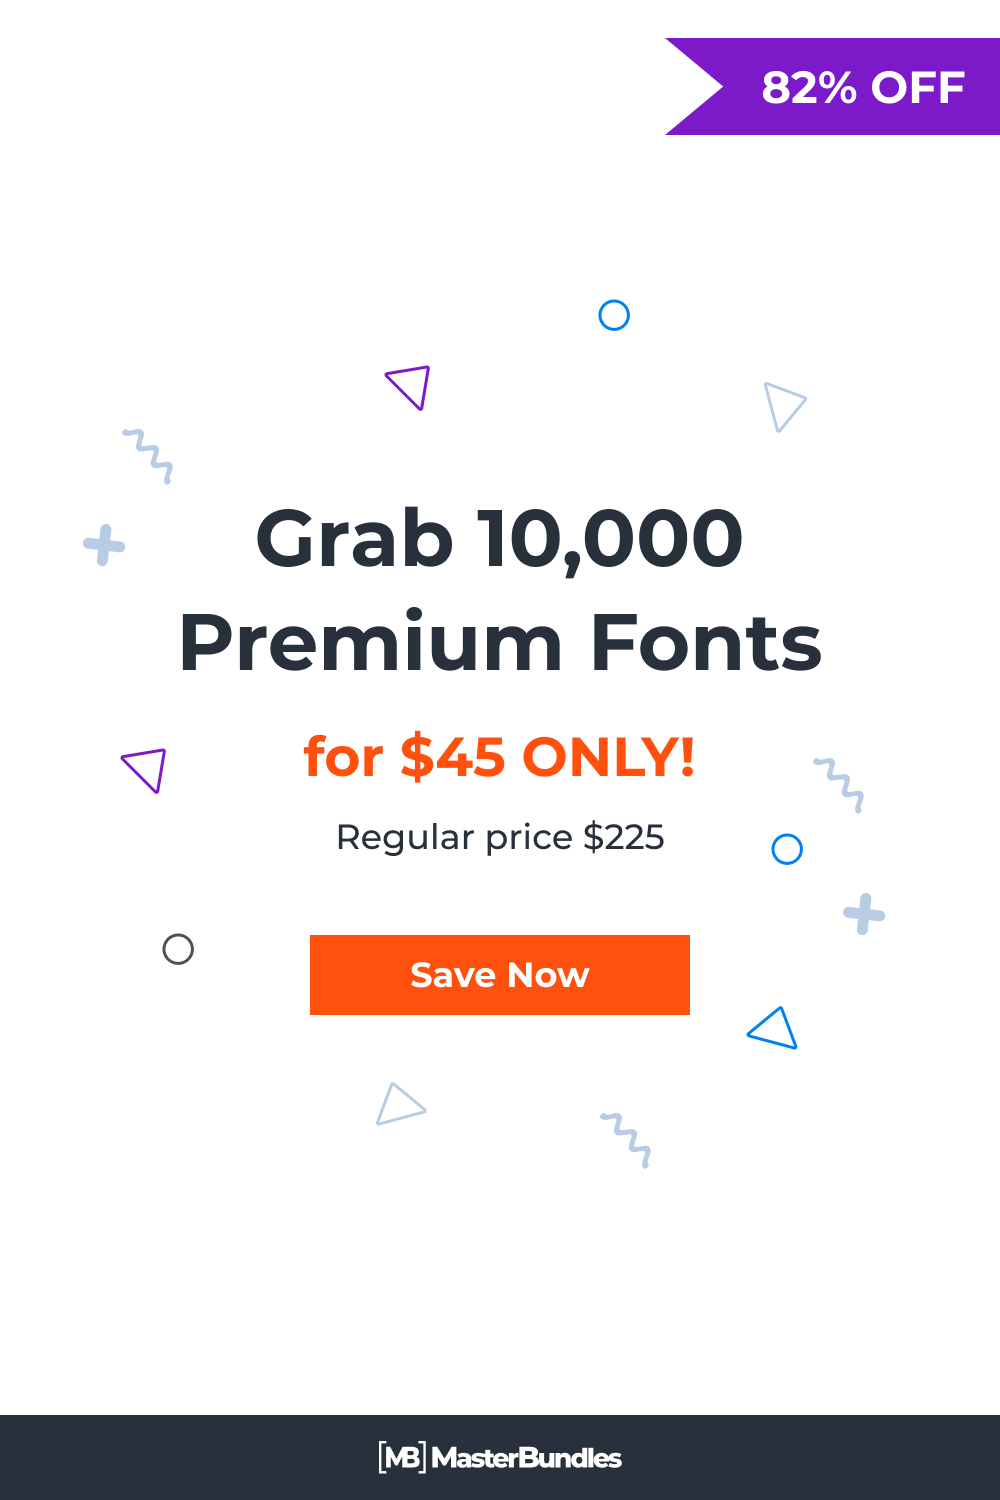 The Ultimate Font Collection features 10,000 high quality, premium fonts ready for use in any project, commercial or personal! Pinterest